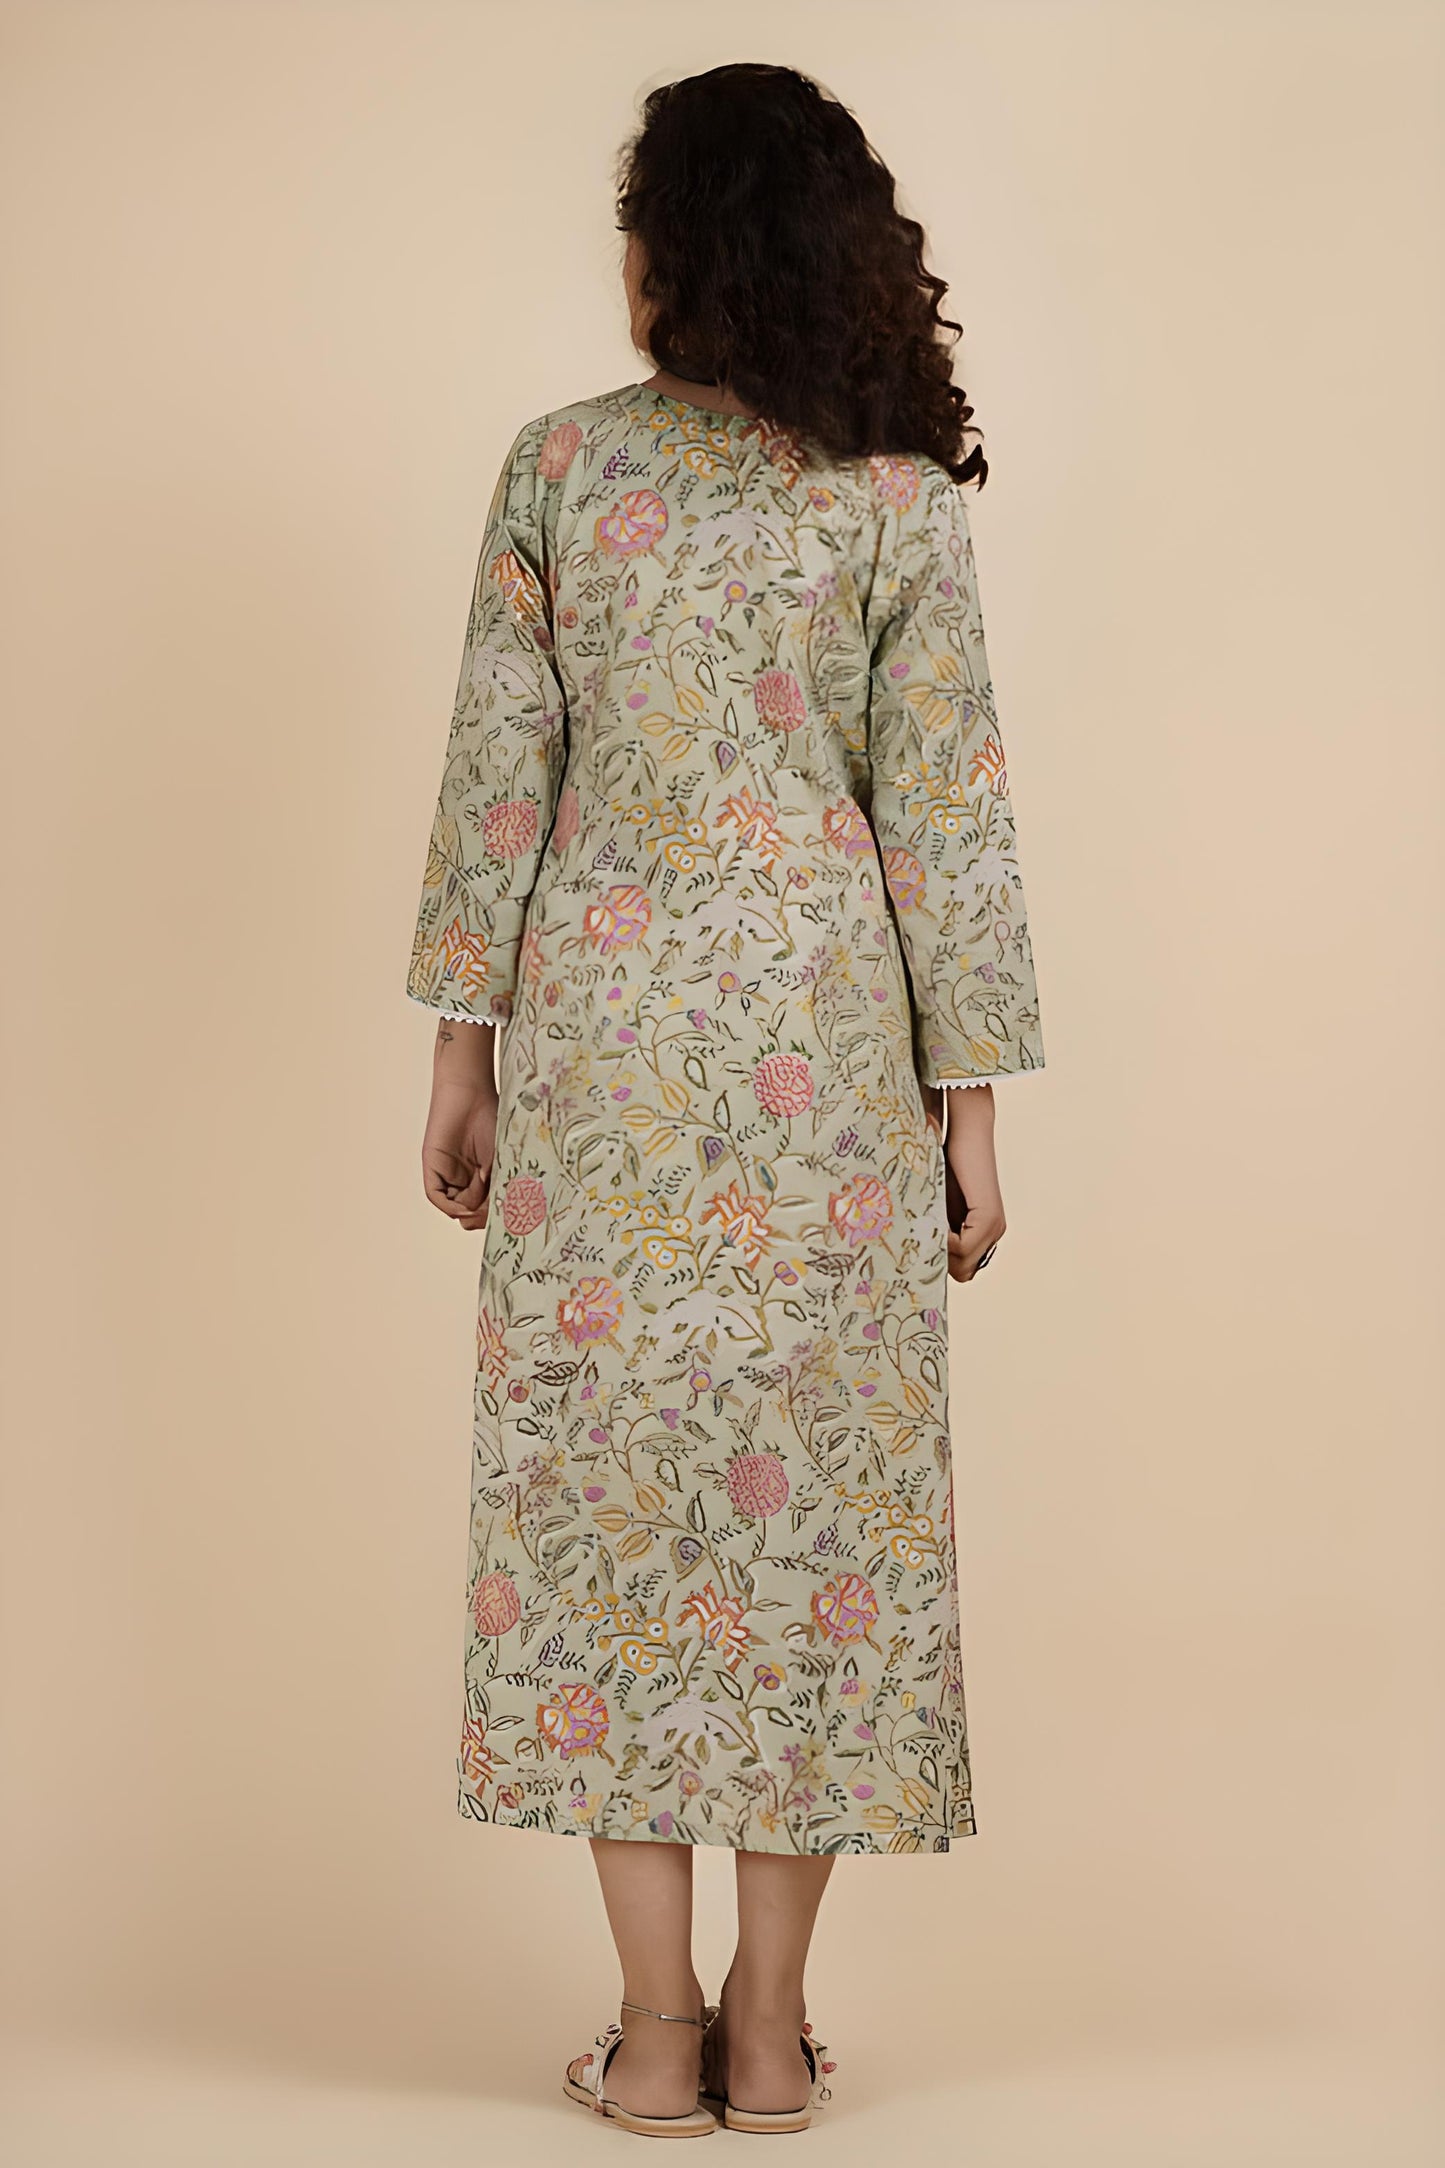 THE SOUL GARDEN : Hand block printed cotton dress with pearl detail - SIMPLY KITSCH